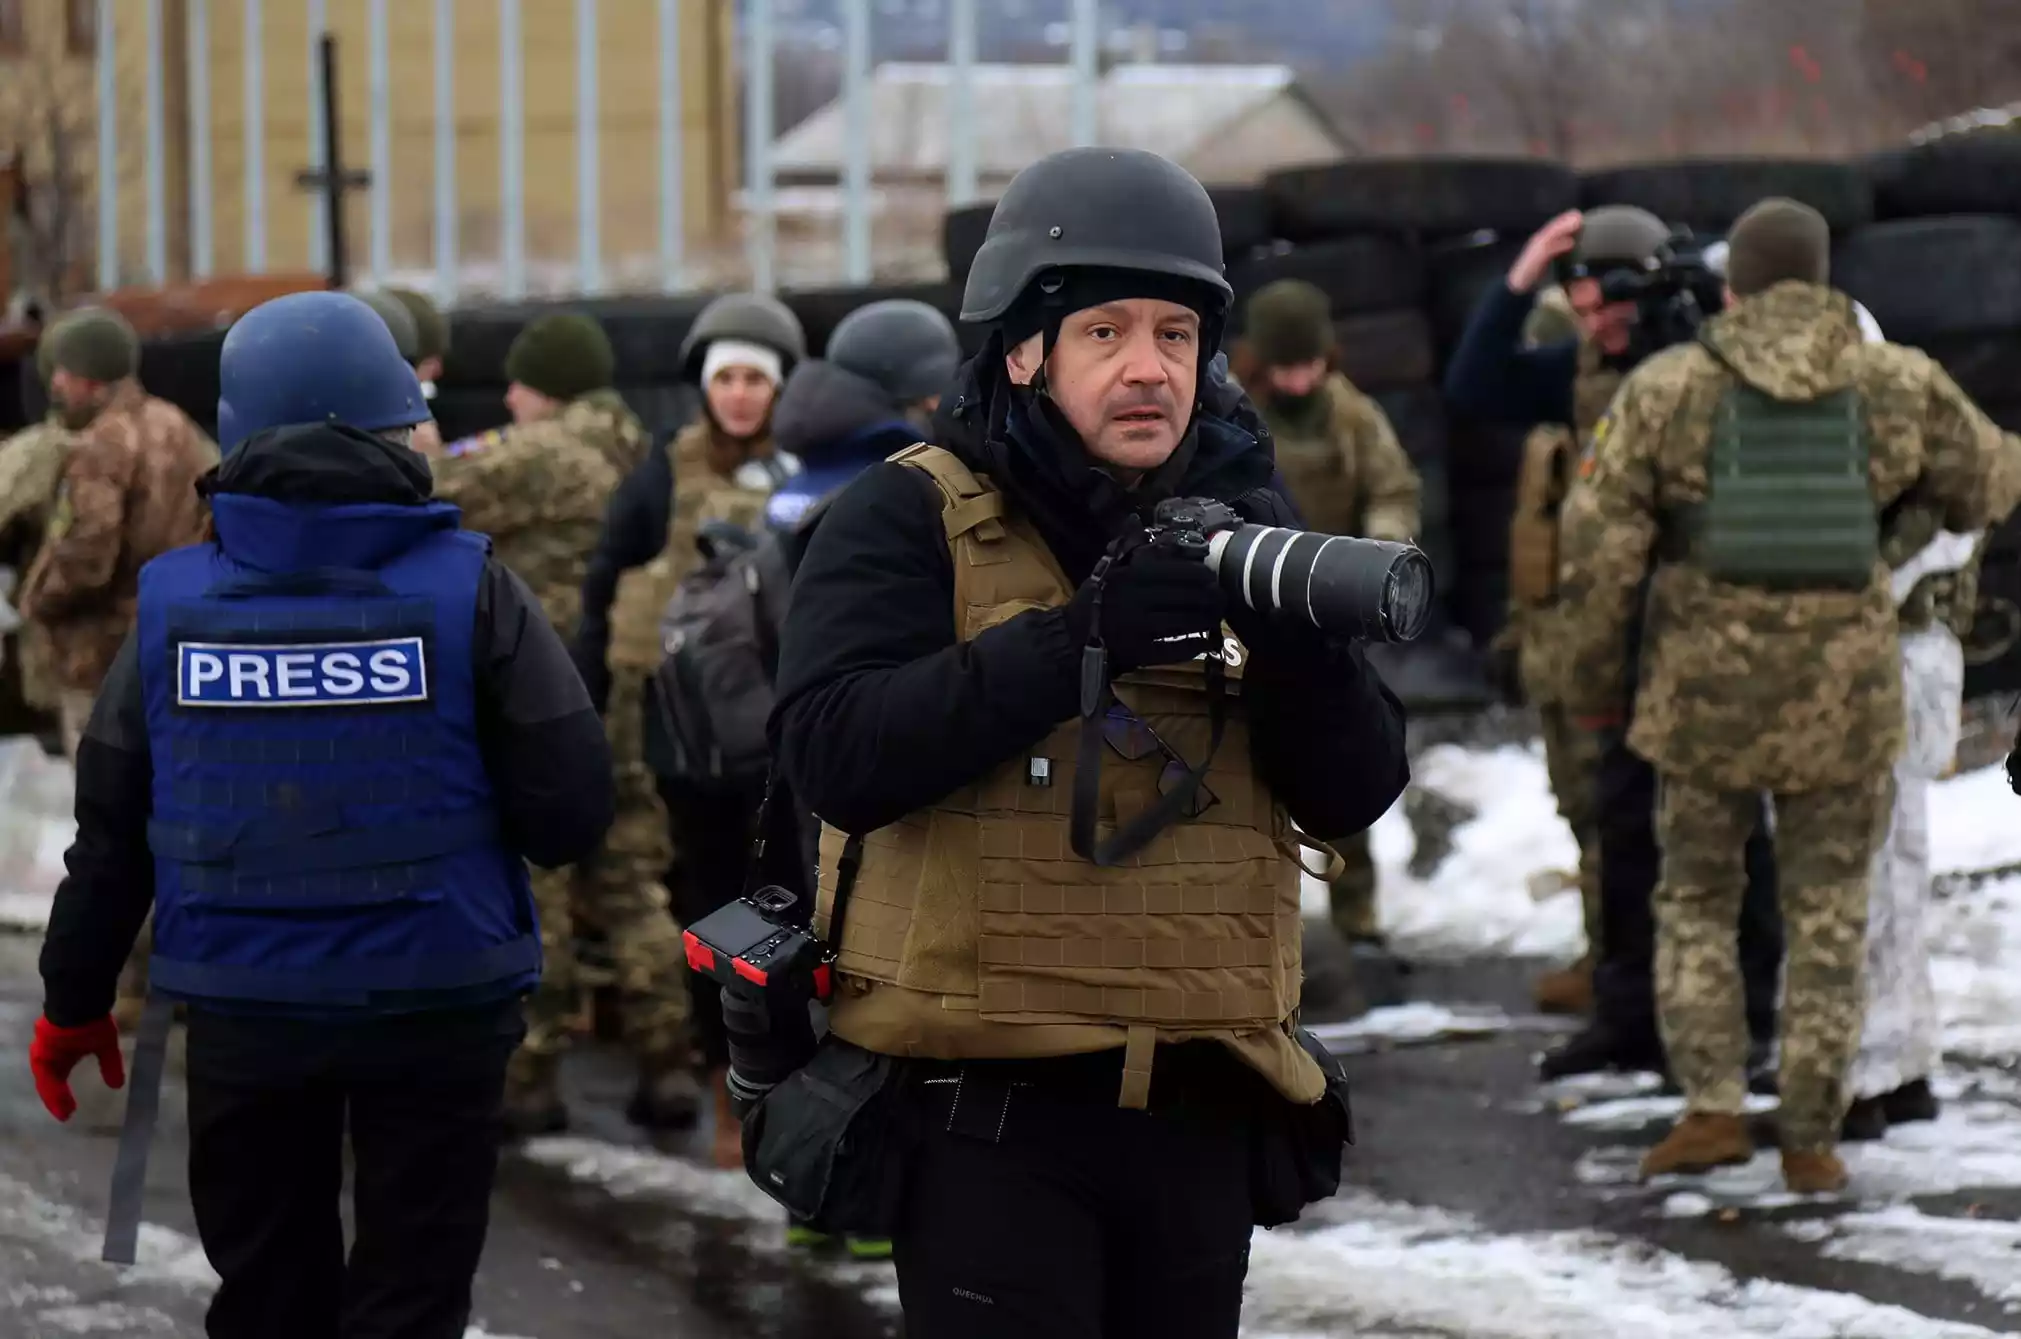 Open letter to media professionals who cover Russia’s invasion of Ukraine